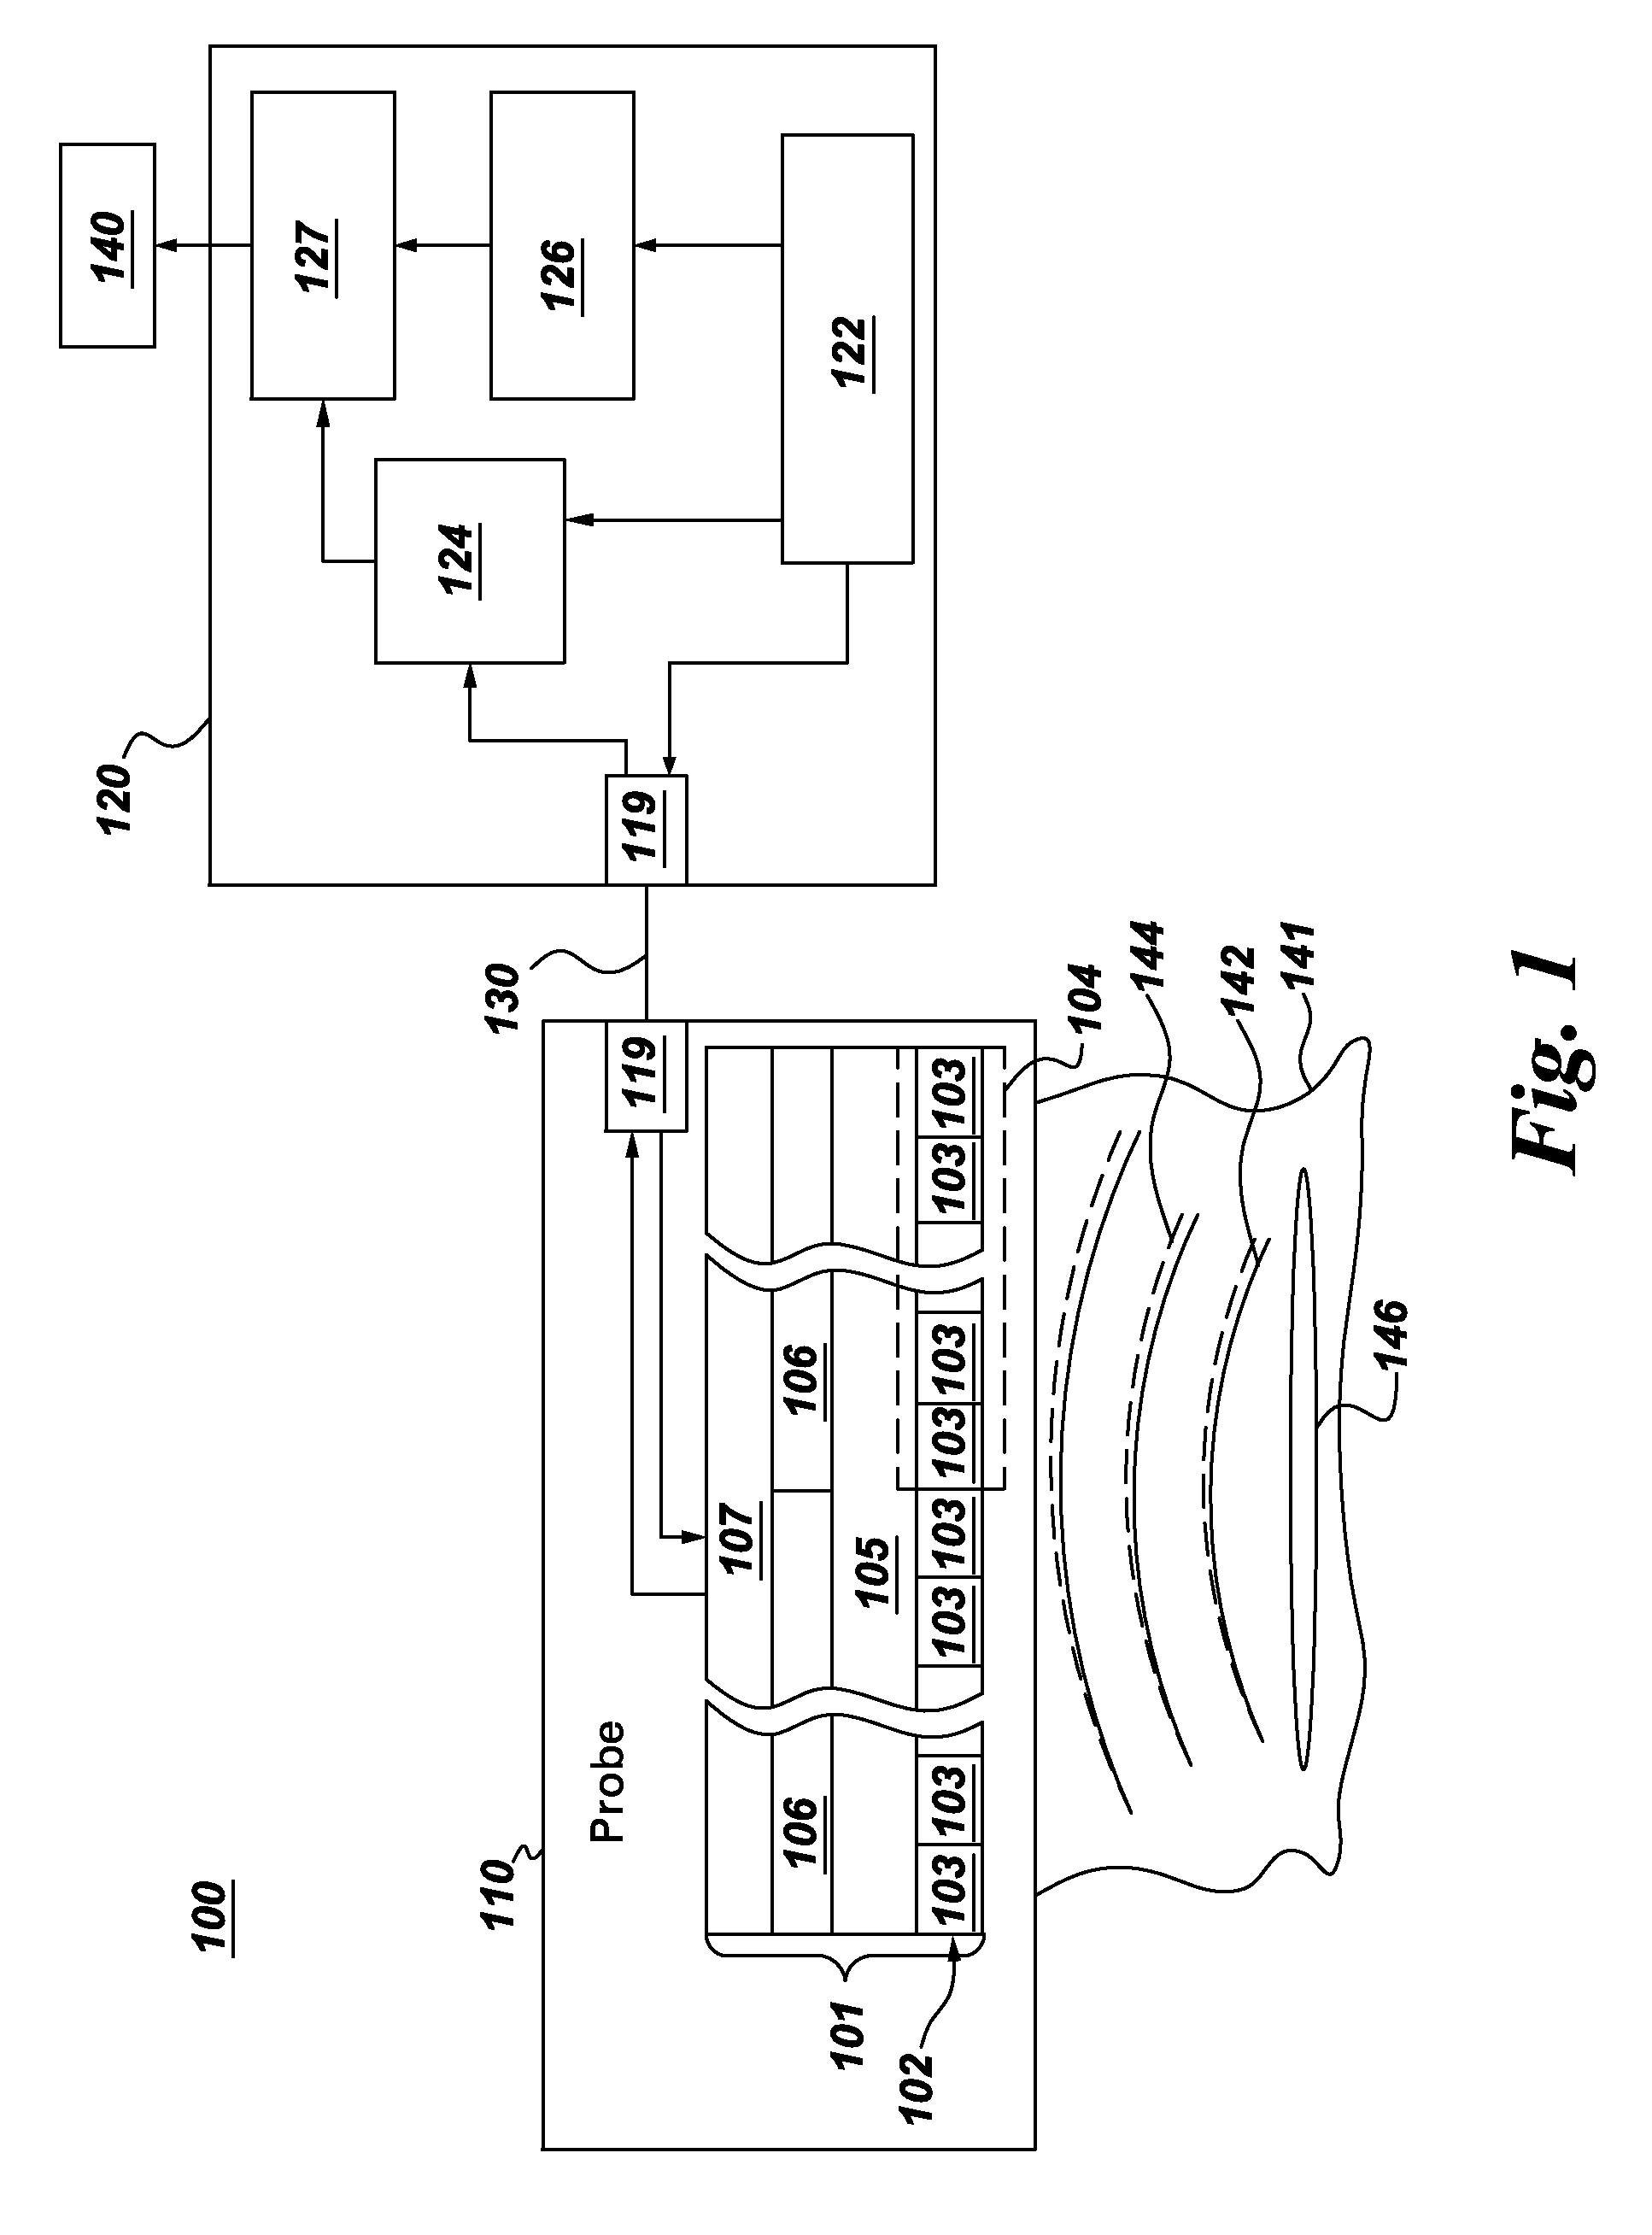 Large area modular sensor array assembly and method for making the same